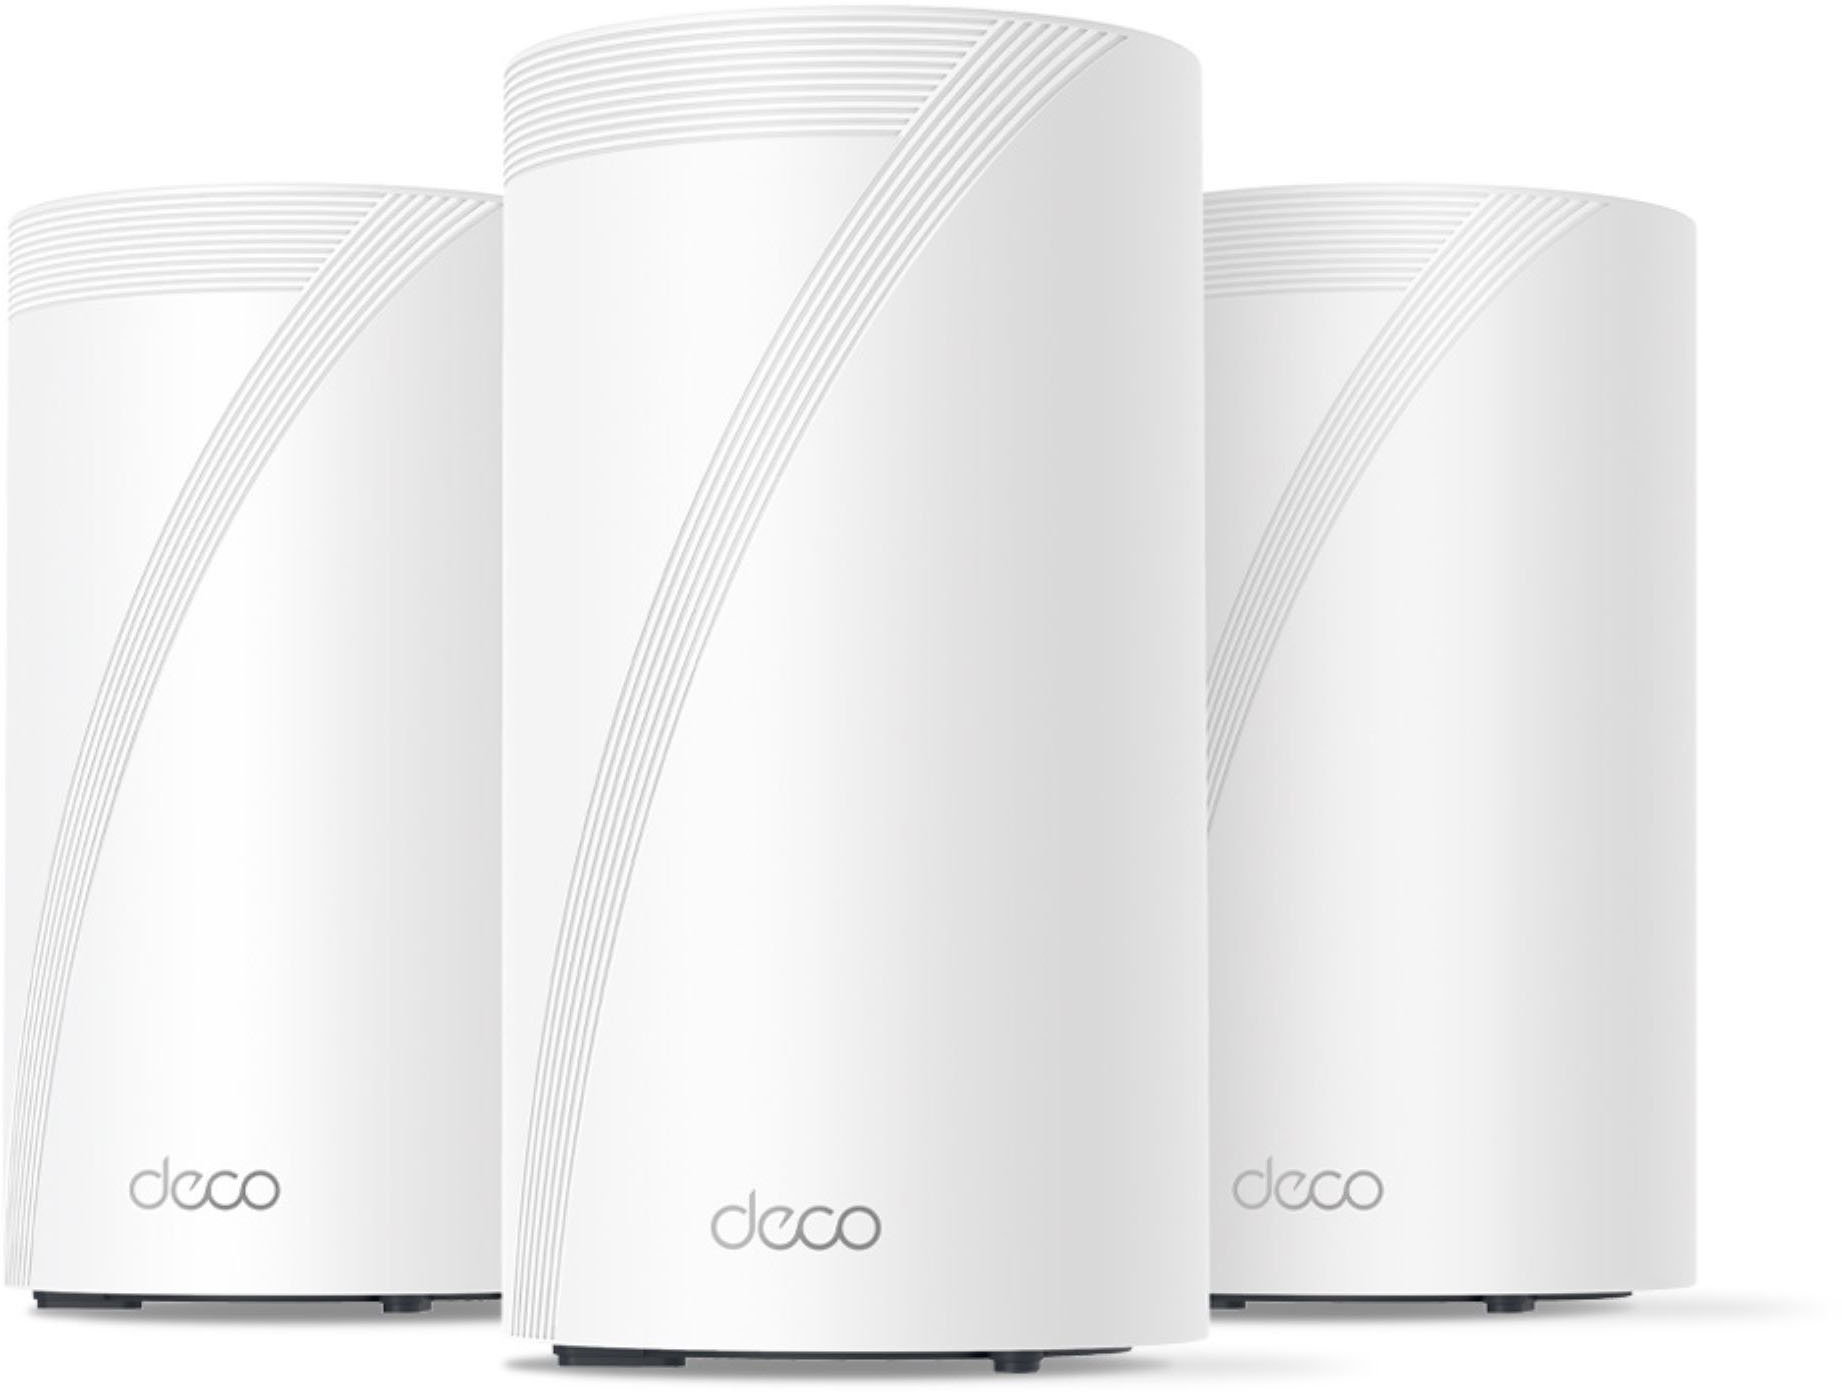 TP-Link Mesh WiFi System Review: It Can Make Your Home Dead Spot Free